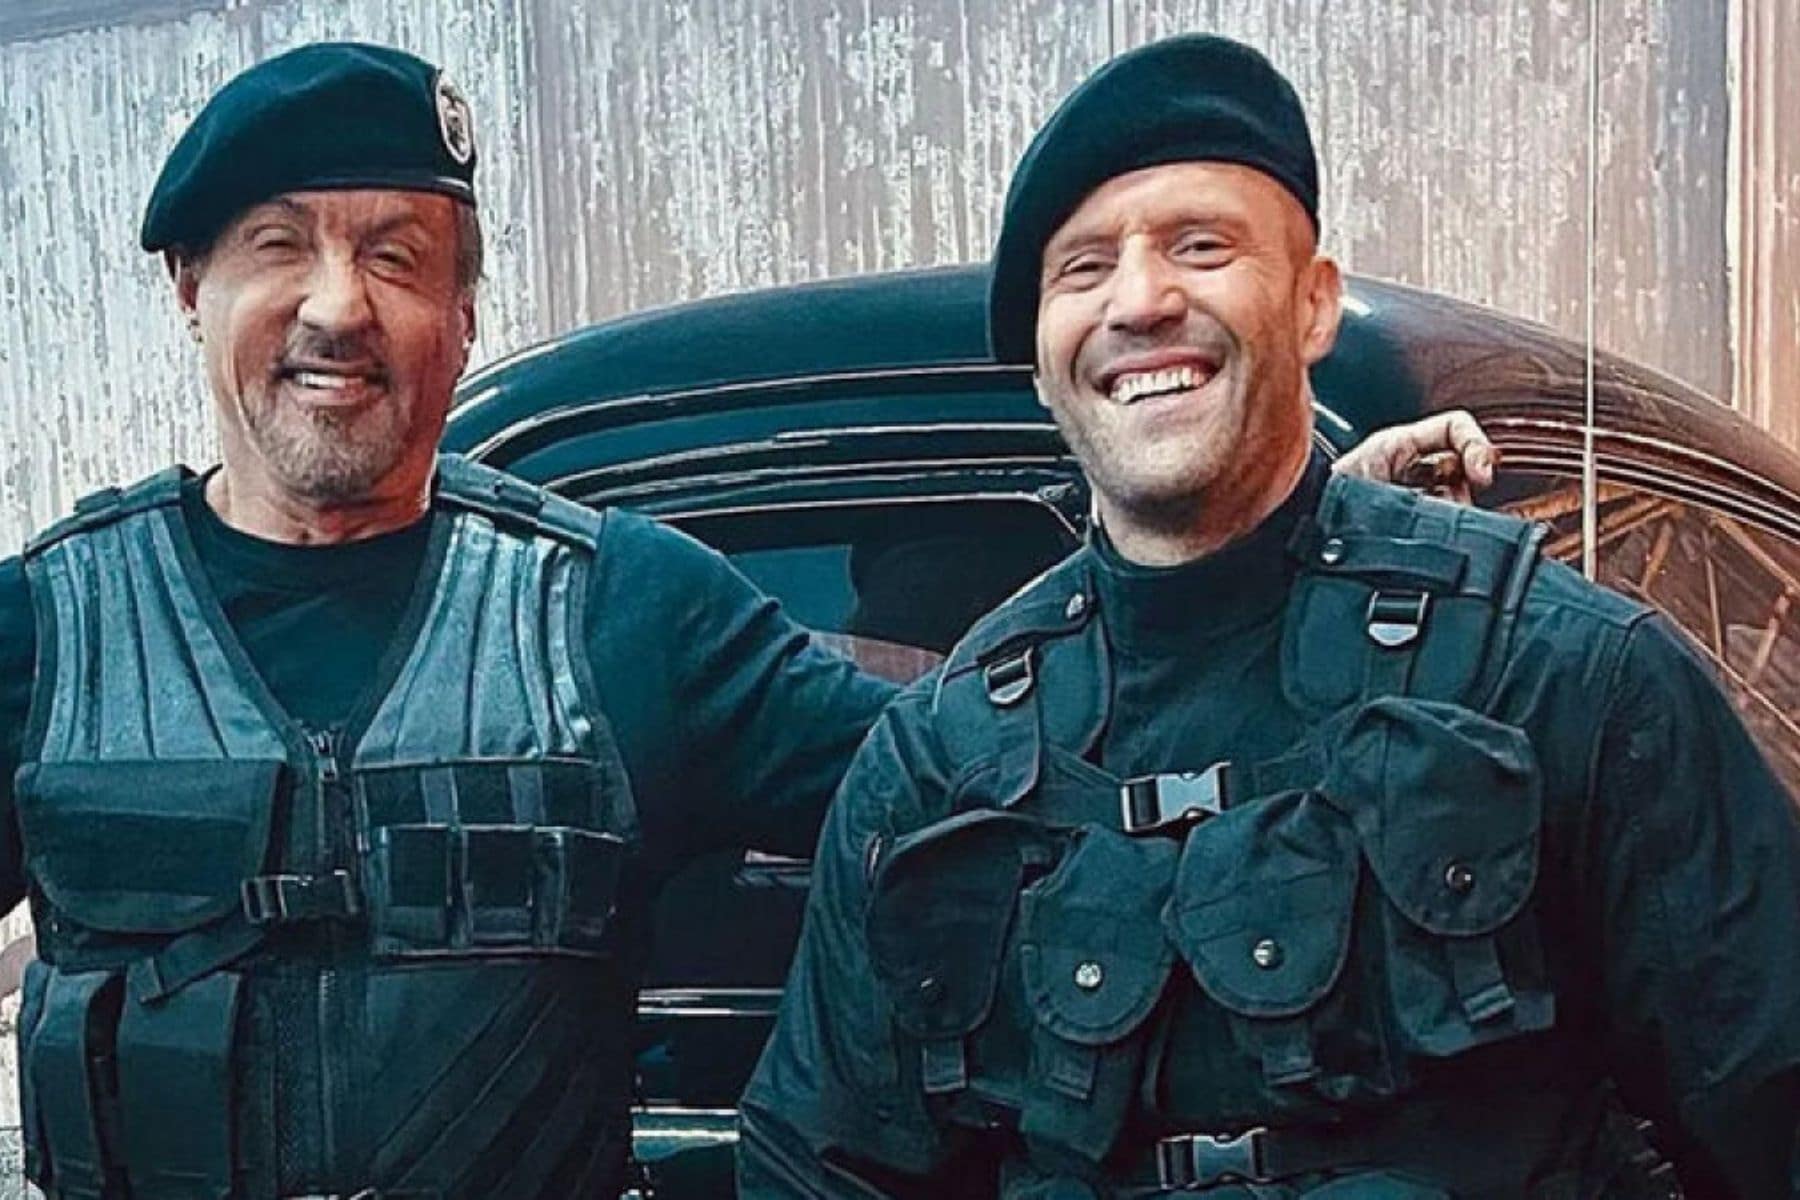 Steven Seagal as Casey Ryback the Expendables 4 (2021) film